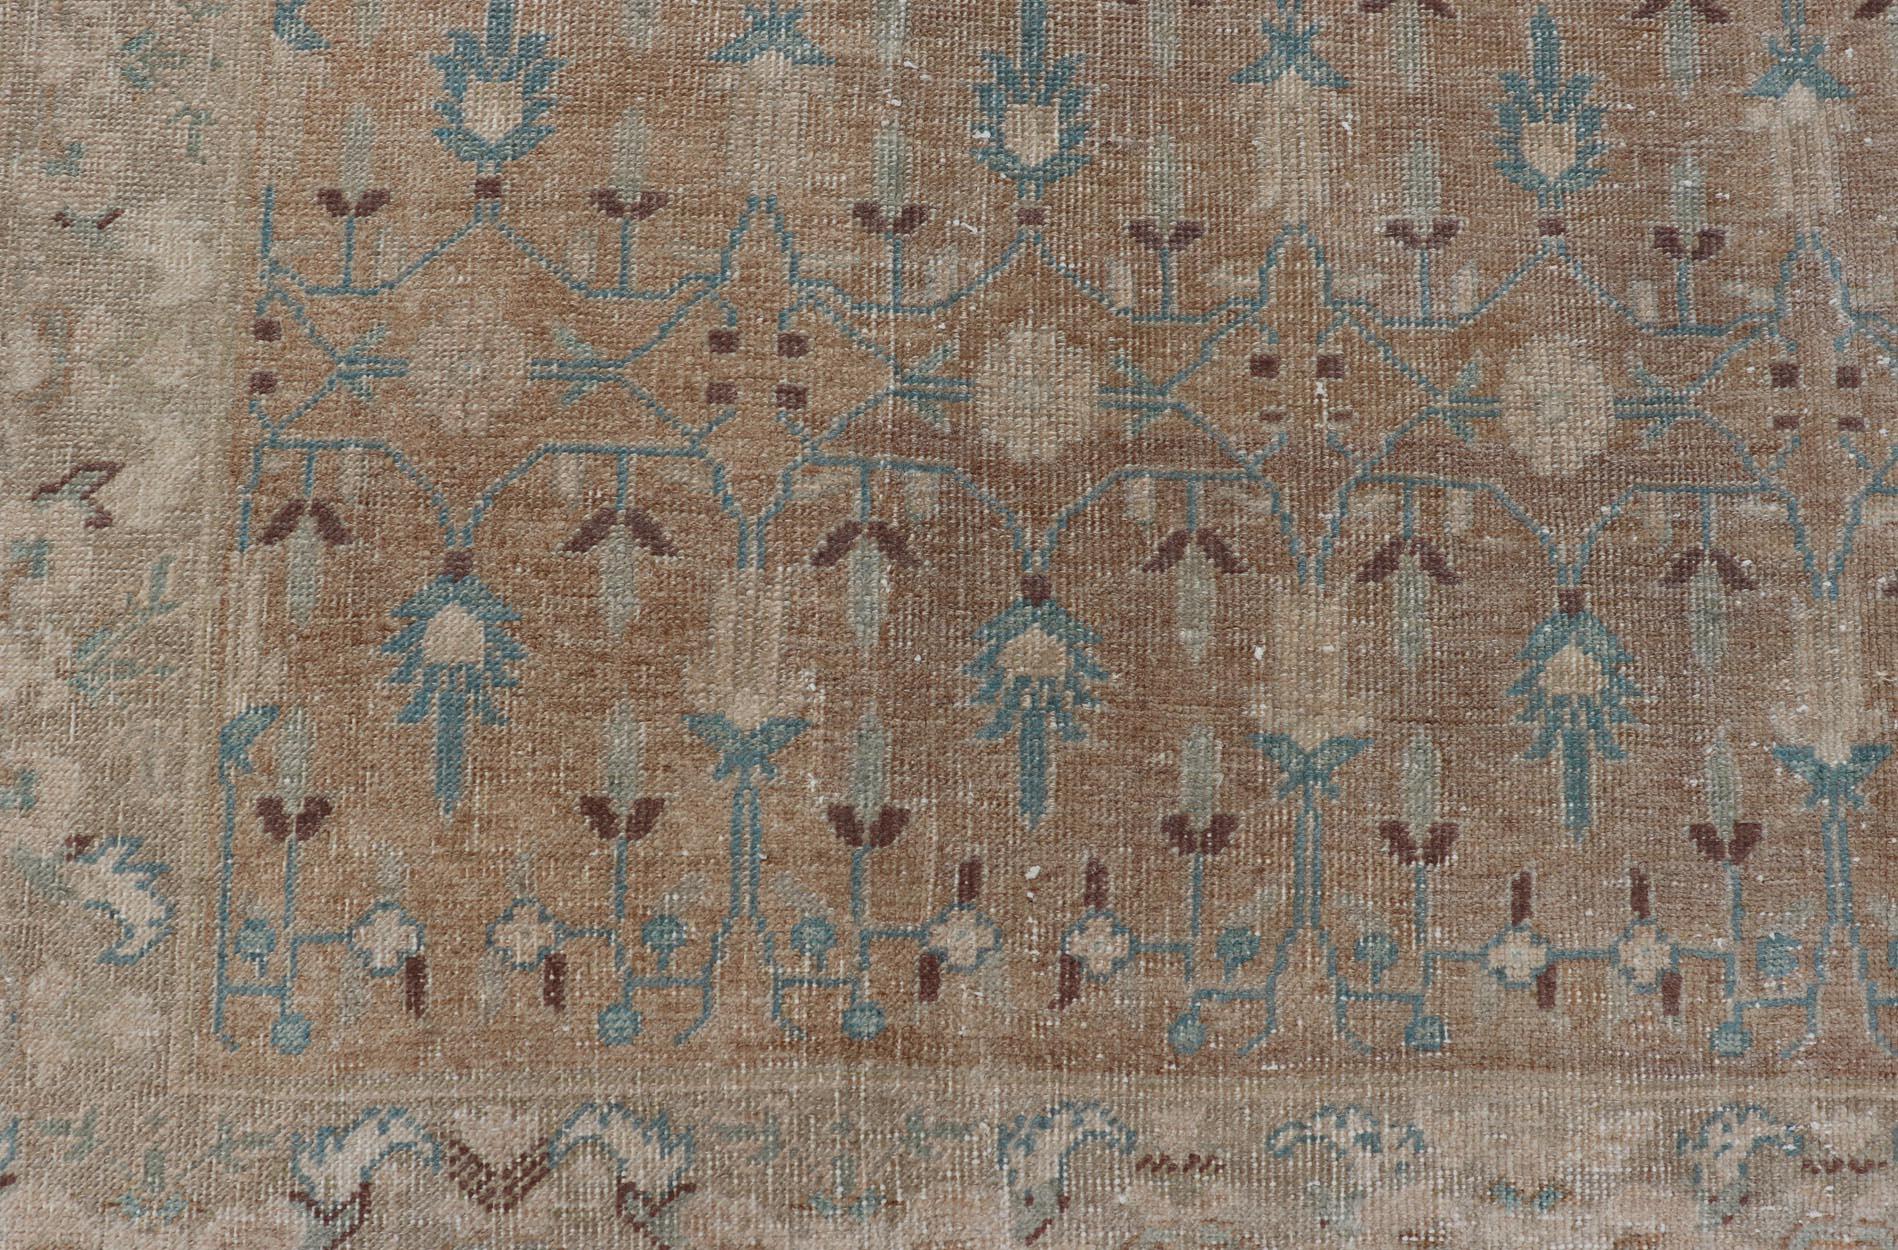 Vintage Turkish Oushak rug with overall Sub-geometric design paired with Delicate colors, Light blue, soft pink, taupe's. Keivan Woven Arts / circa/1940 rug/ EN-86048 Mid-20th Century

Measures: 6'6 x 9'1.